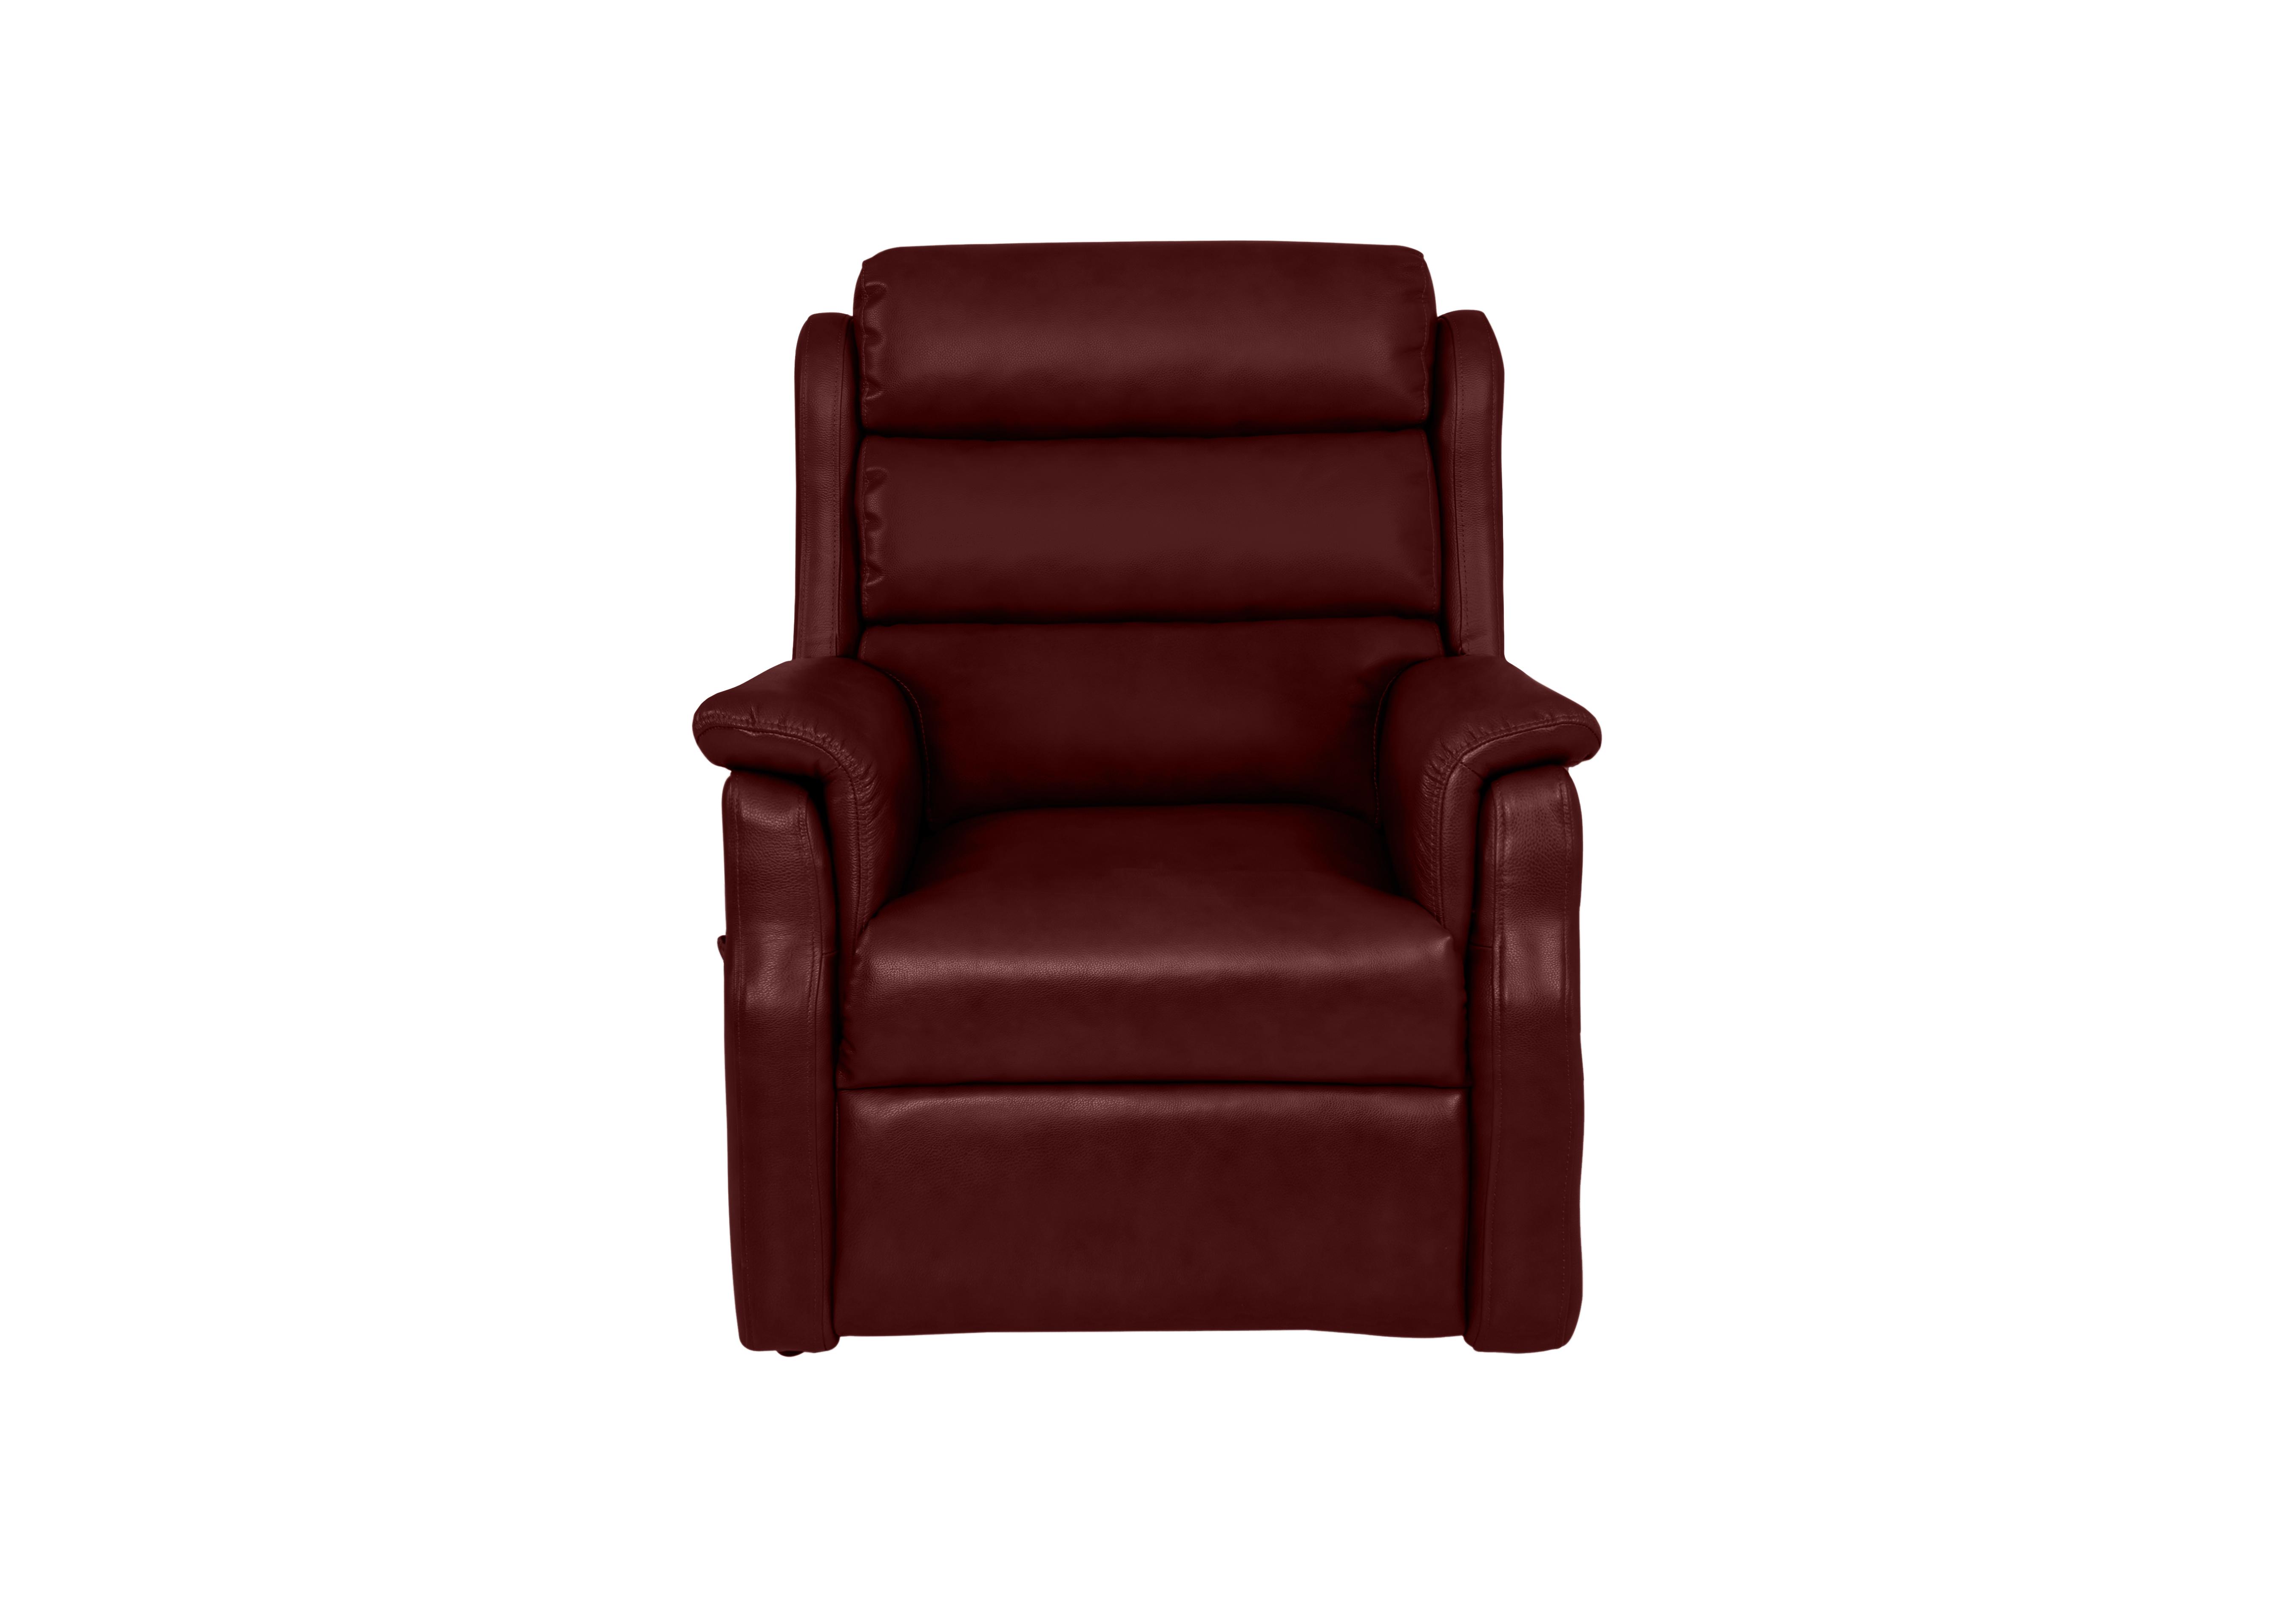 My Chair McCoy Leather Lift and Rise Chair in Cat-60/15 Montana Ruby on Furniture Village